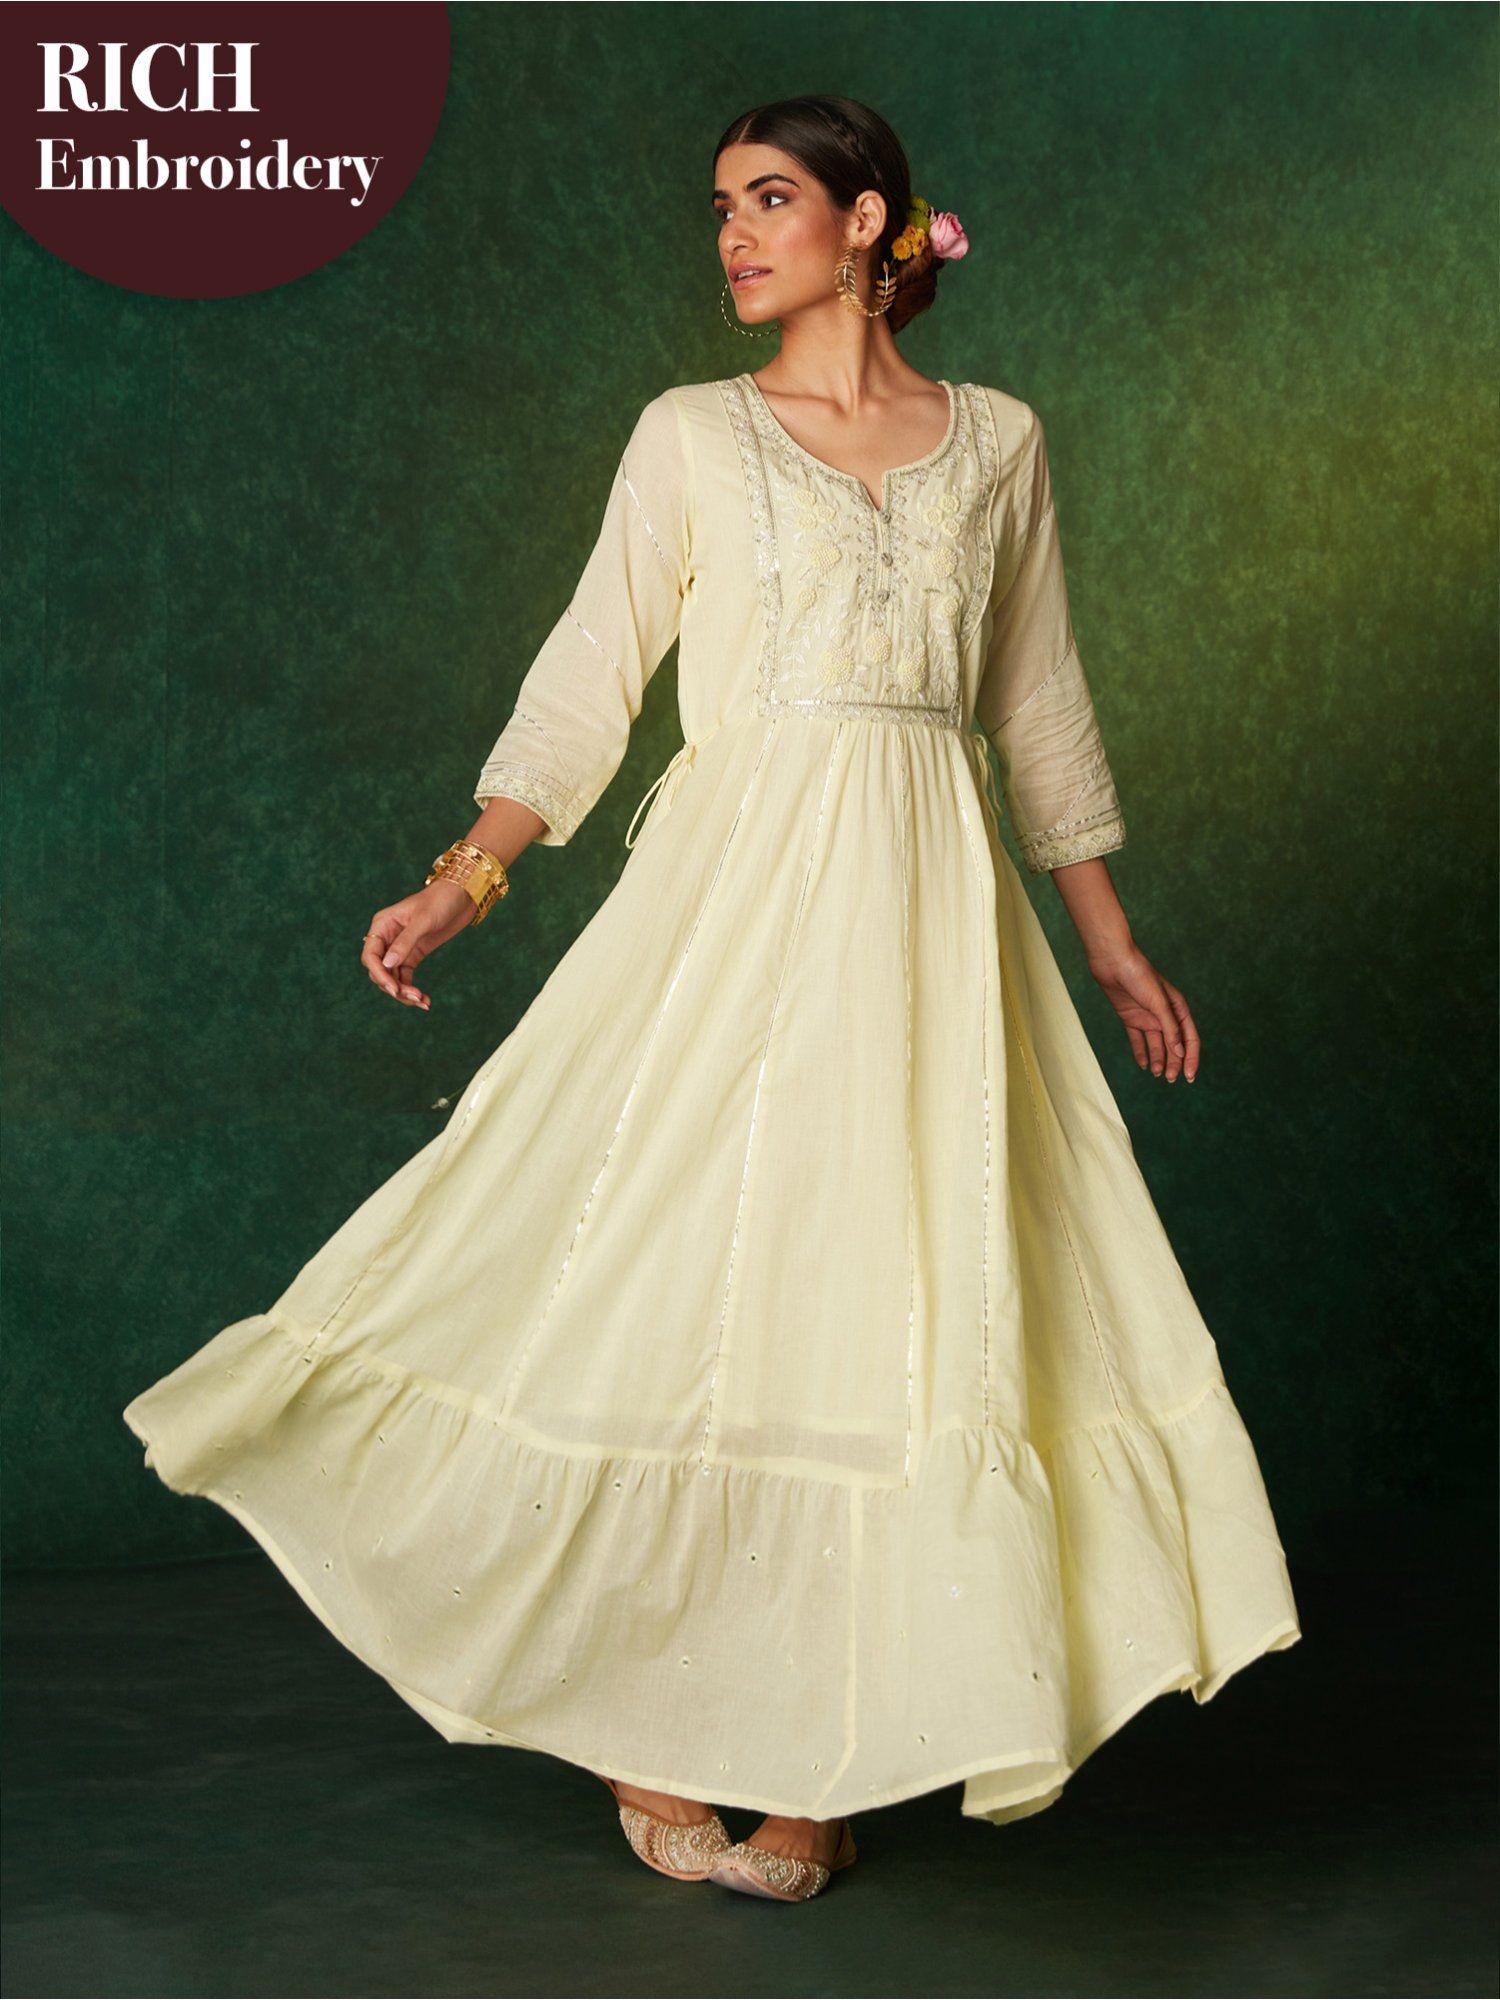 noor light yellow hand embroidered tiered dress likdrs34